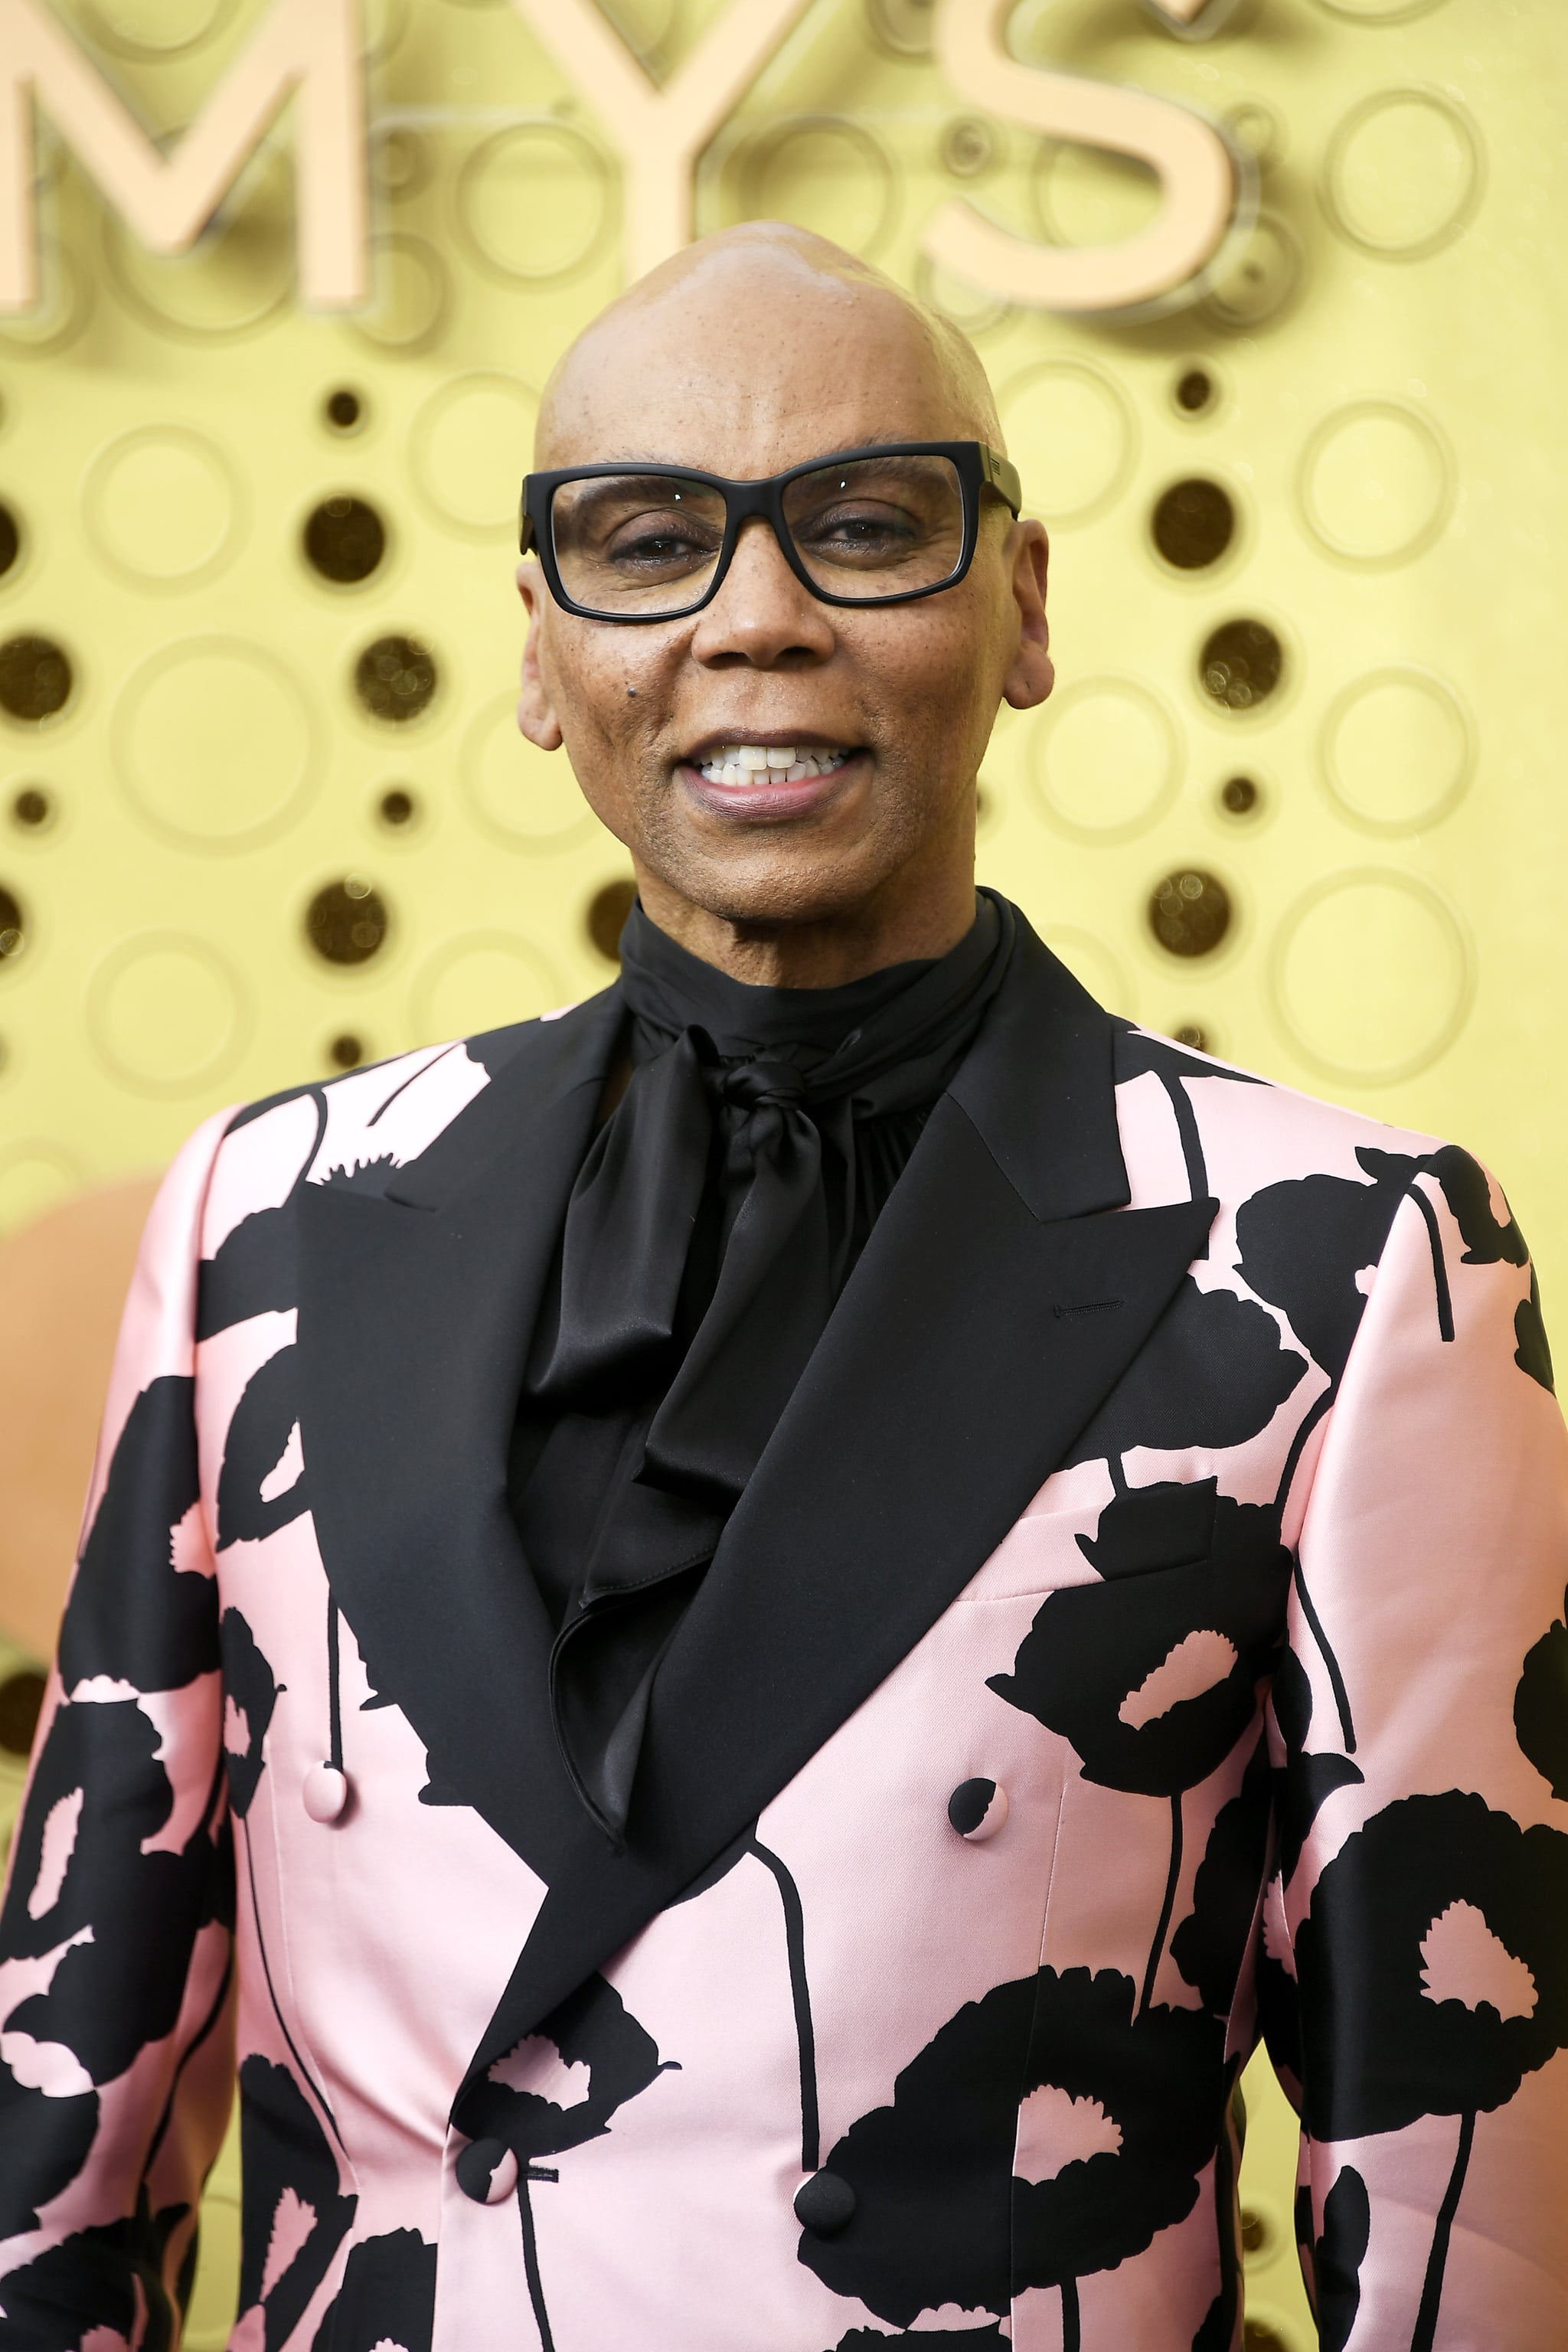 LOS ANGELES, CALIFORNIA - SEPTEMBER 22: RuPaul attends the 71st Emmy Awards at Microsoft Theatre on September 22, 2019 in Los Angeles, California. (Photo by Frazer Harrison/Getty Images)